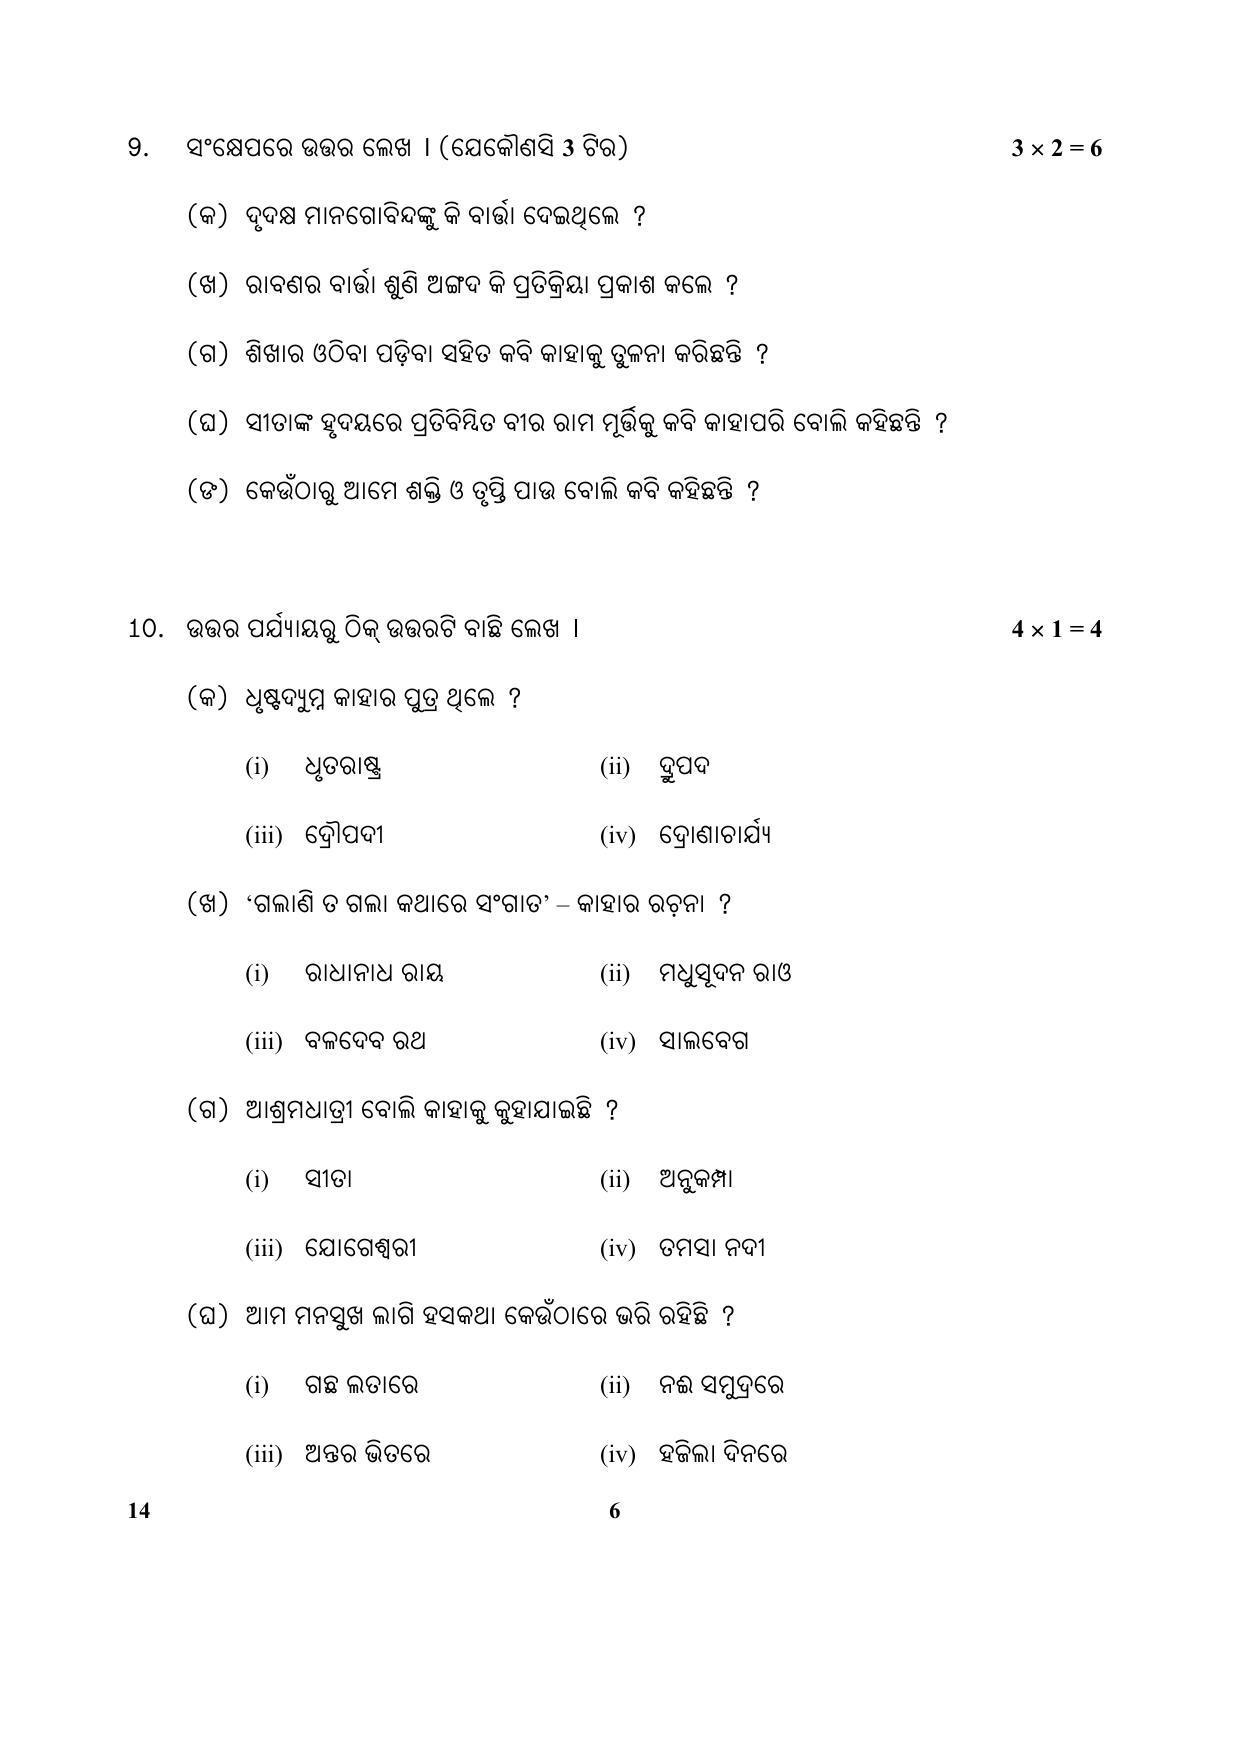 CBSE Class 10 14 (Odia) 2018 Question Paper - Page 6